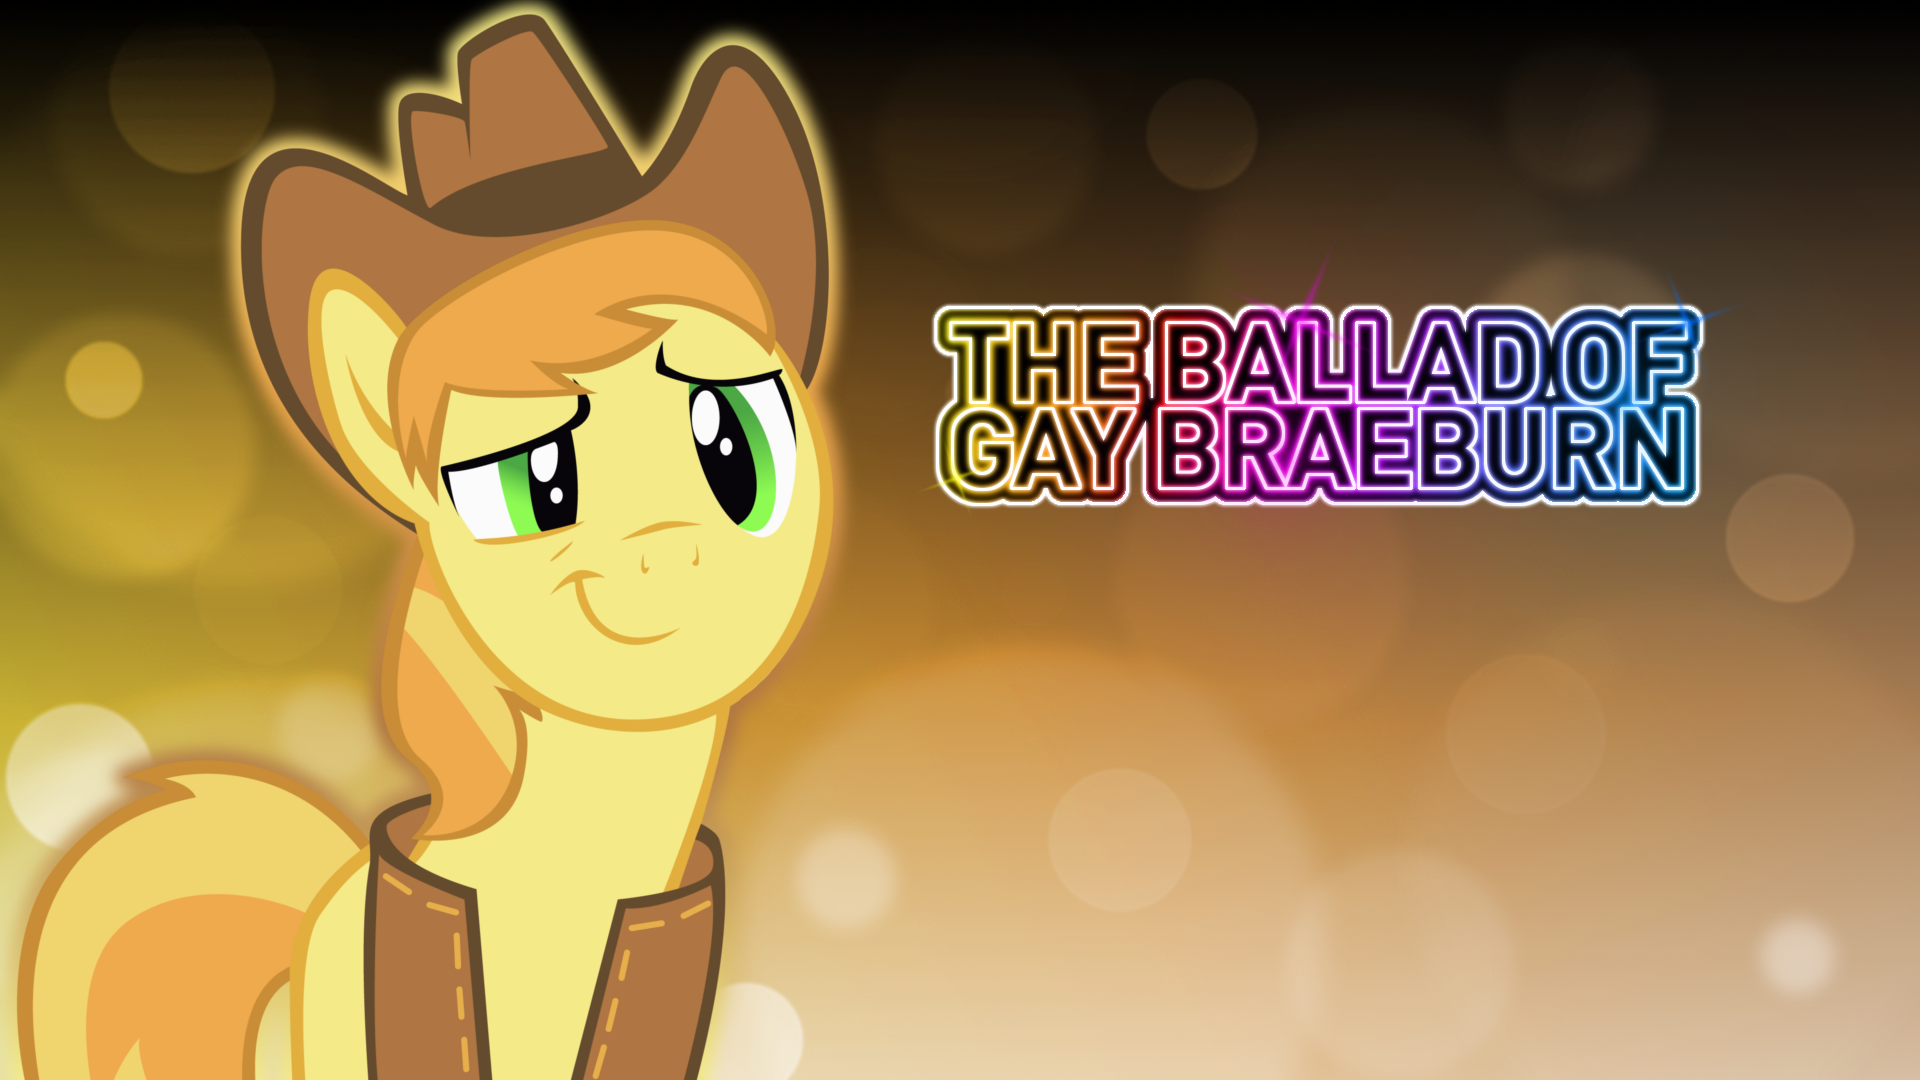 The Ballad of Gay Braeburn - Wallpaper by Heart-Of-Stitches and Tadashi--kun